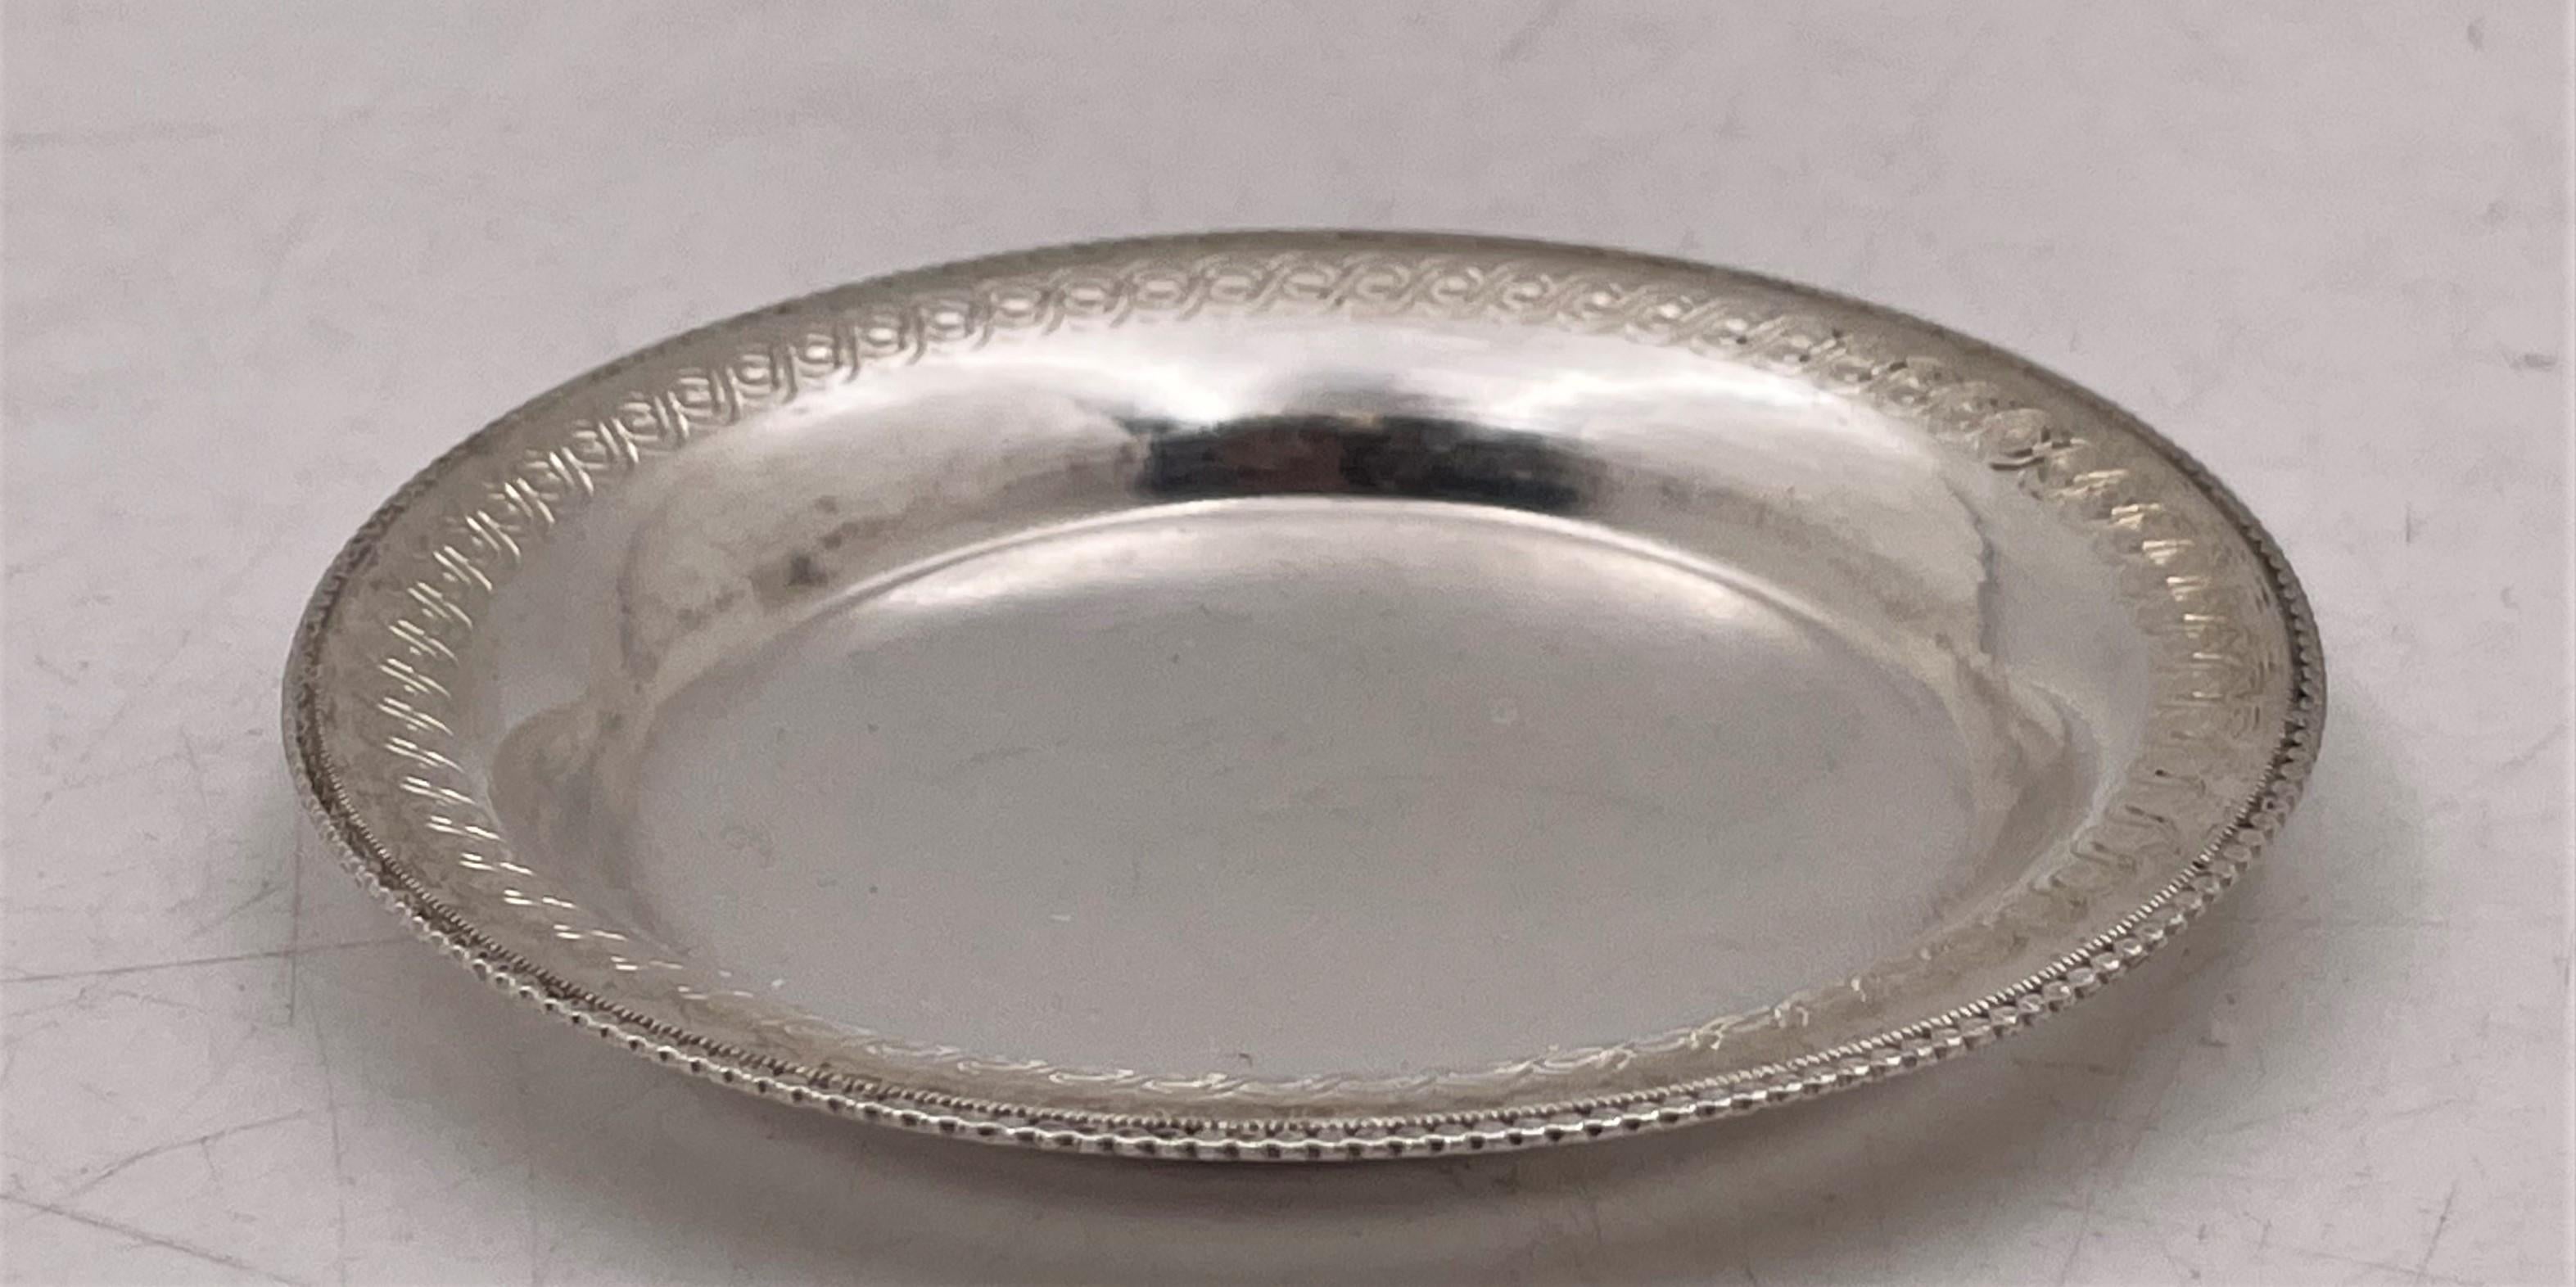 Set of 18 Egyptian silver coasters, made in Cairo circa 1943-1944, with a finely engraved geometric motif adorning the rim, measuring 3'' in diameter (inner diameter 2 1/8'') by 1/4'' in height, and bearing hallmarks as shown. Total weight is 16.2